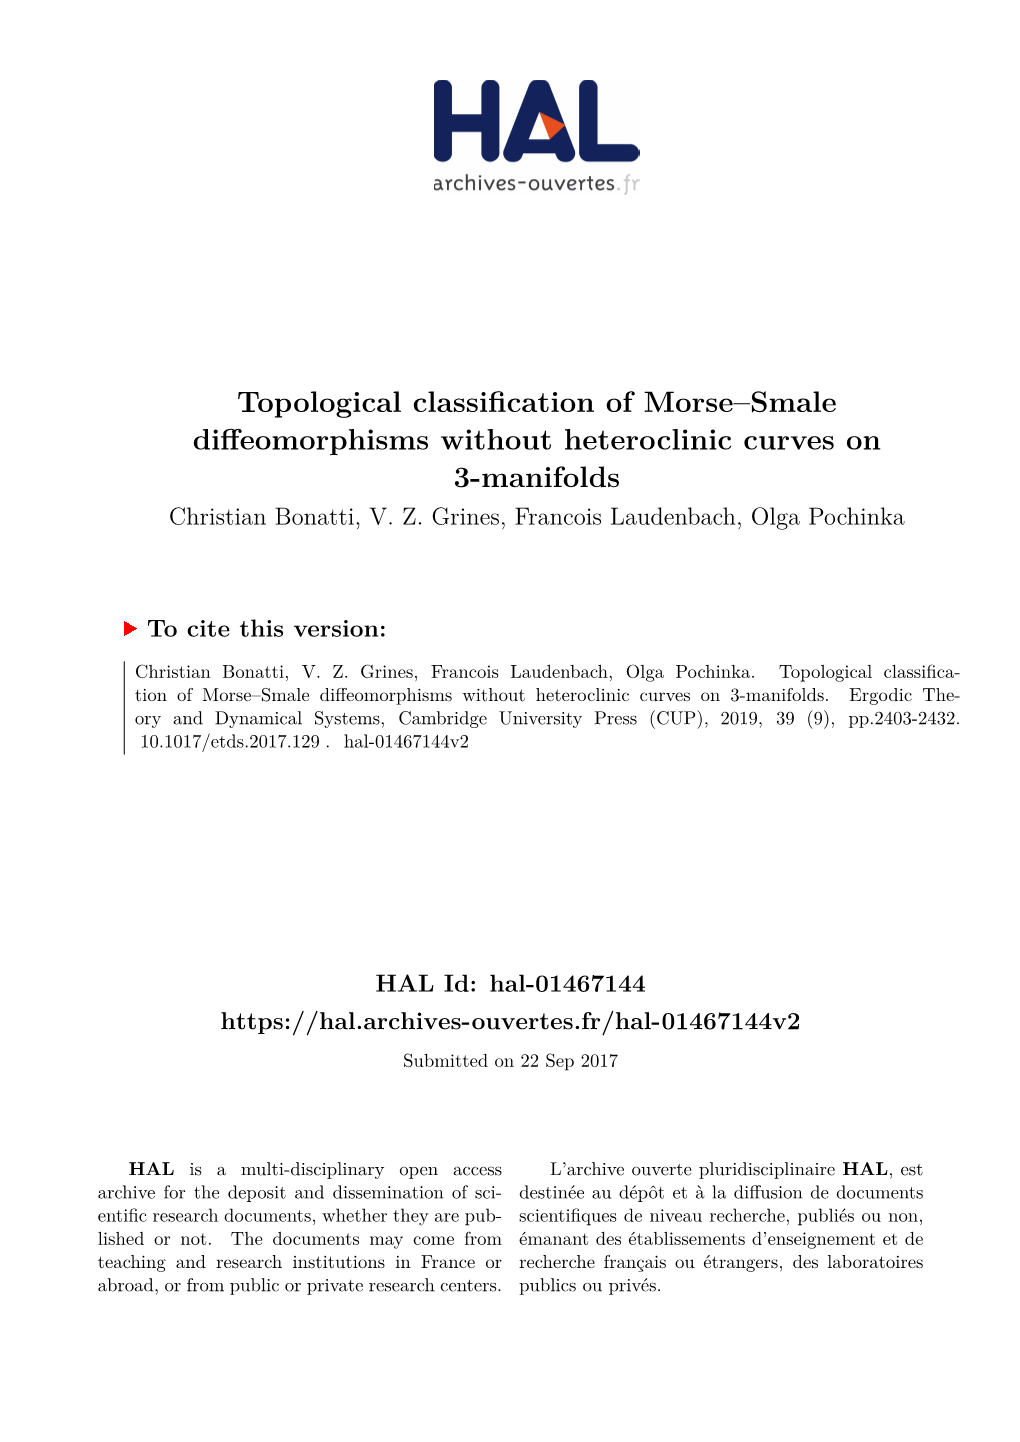 Topological Classification of Morse–Smale Diffeomorphisms Without Heteroclinic Curves on 3-Manifolds Christian Bonatti, V